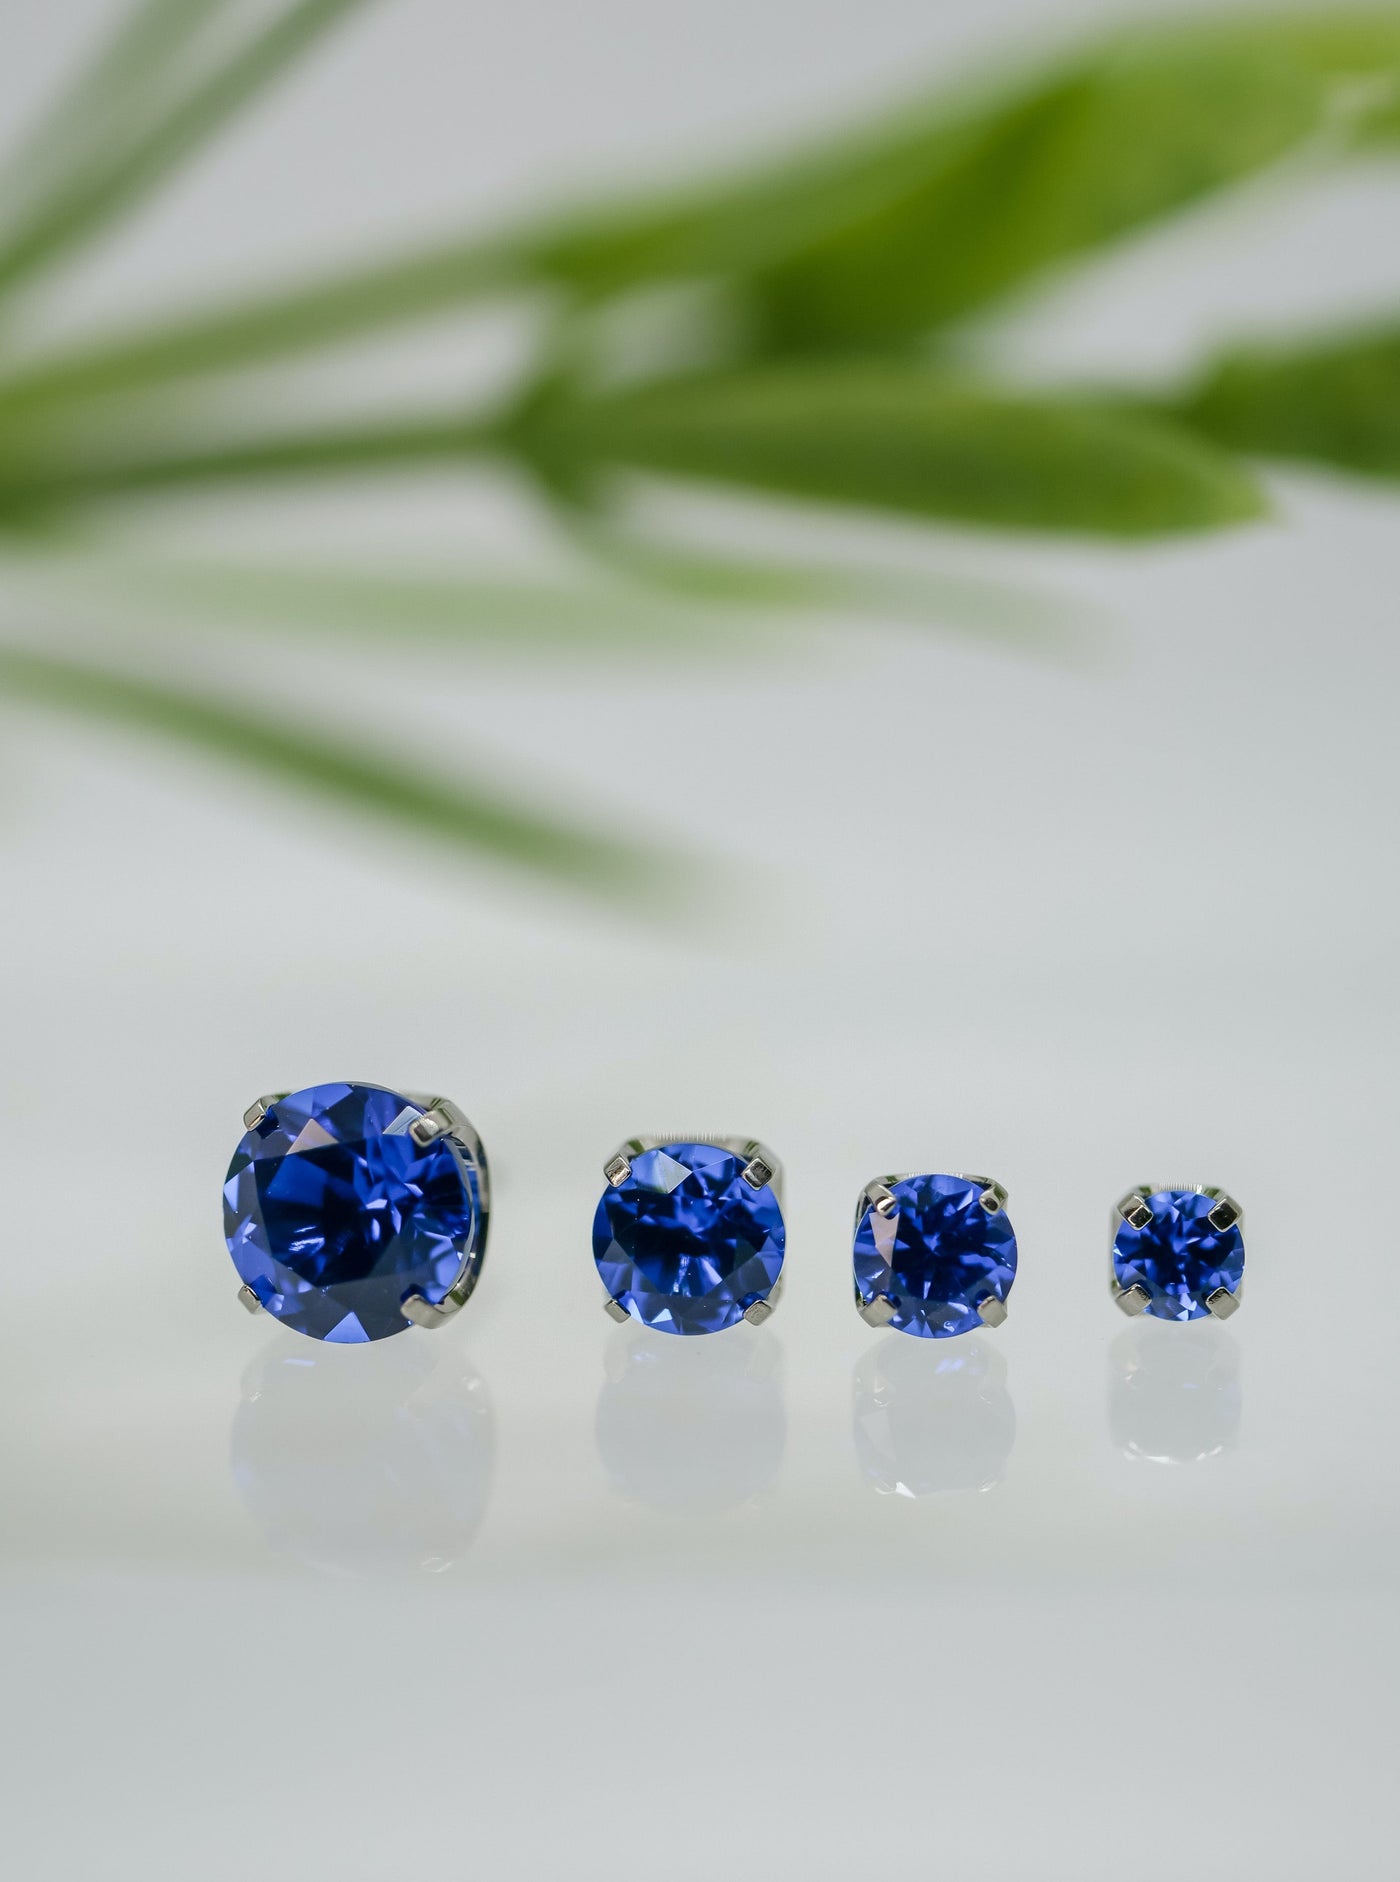 sapphire blue cubic zirconia gems in various sizes